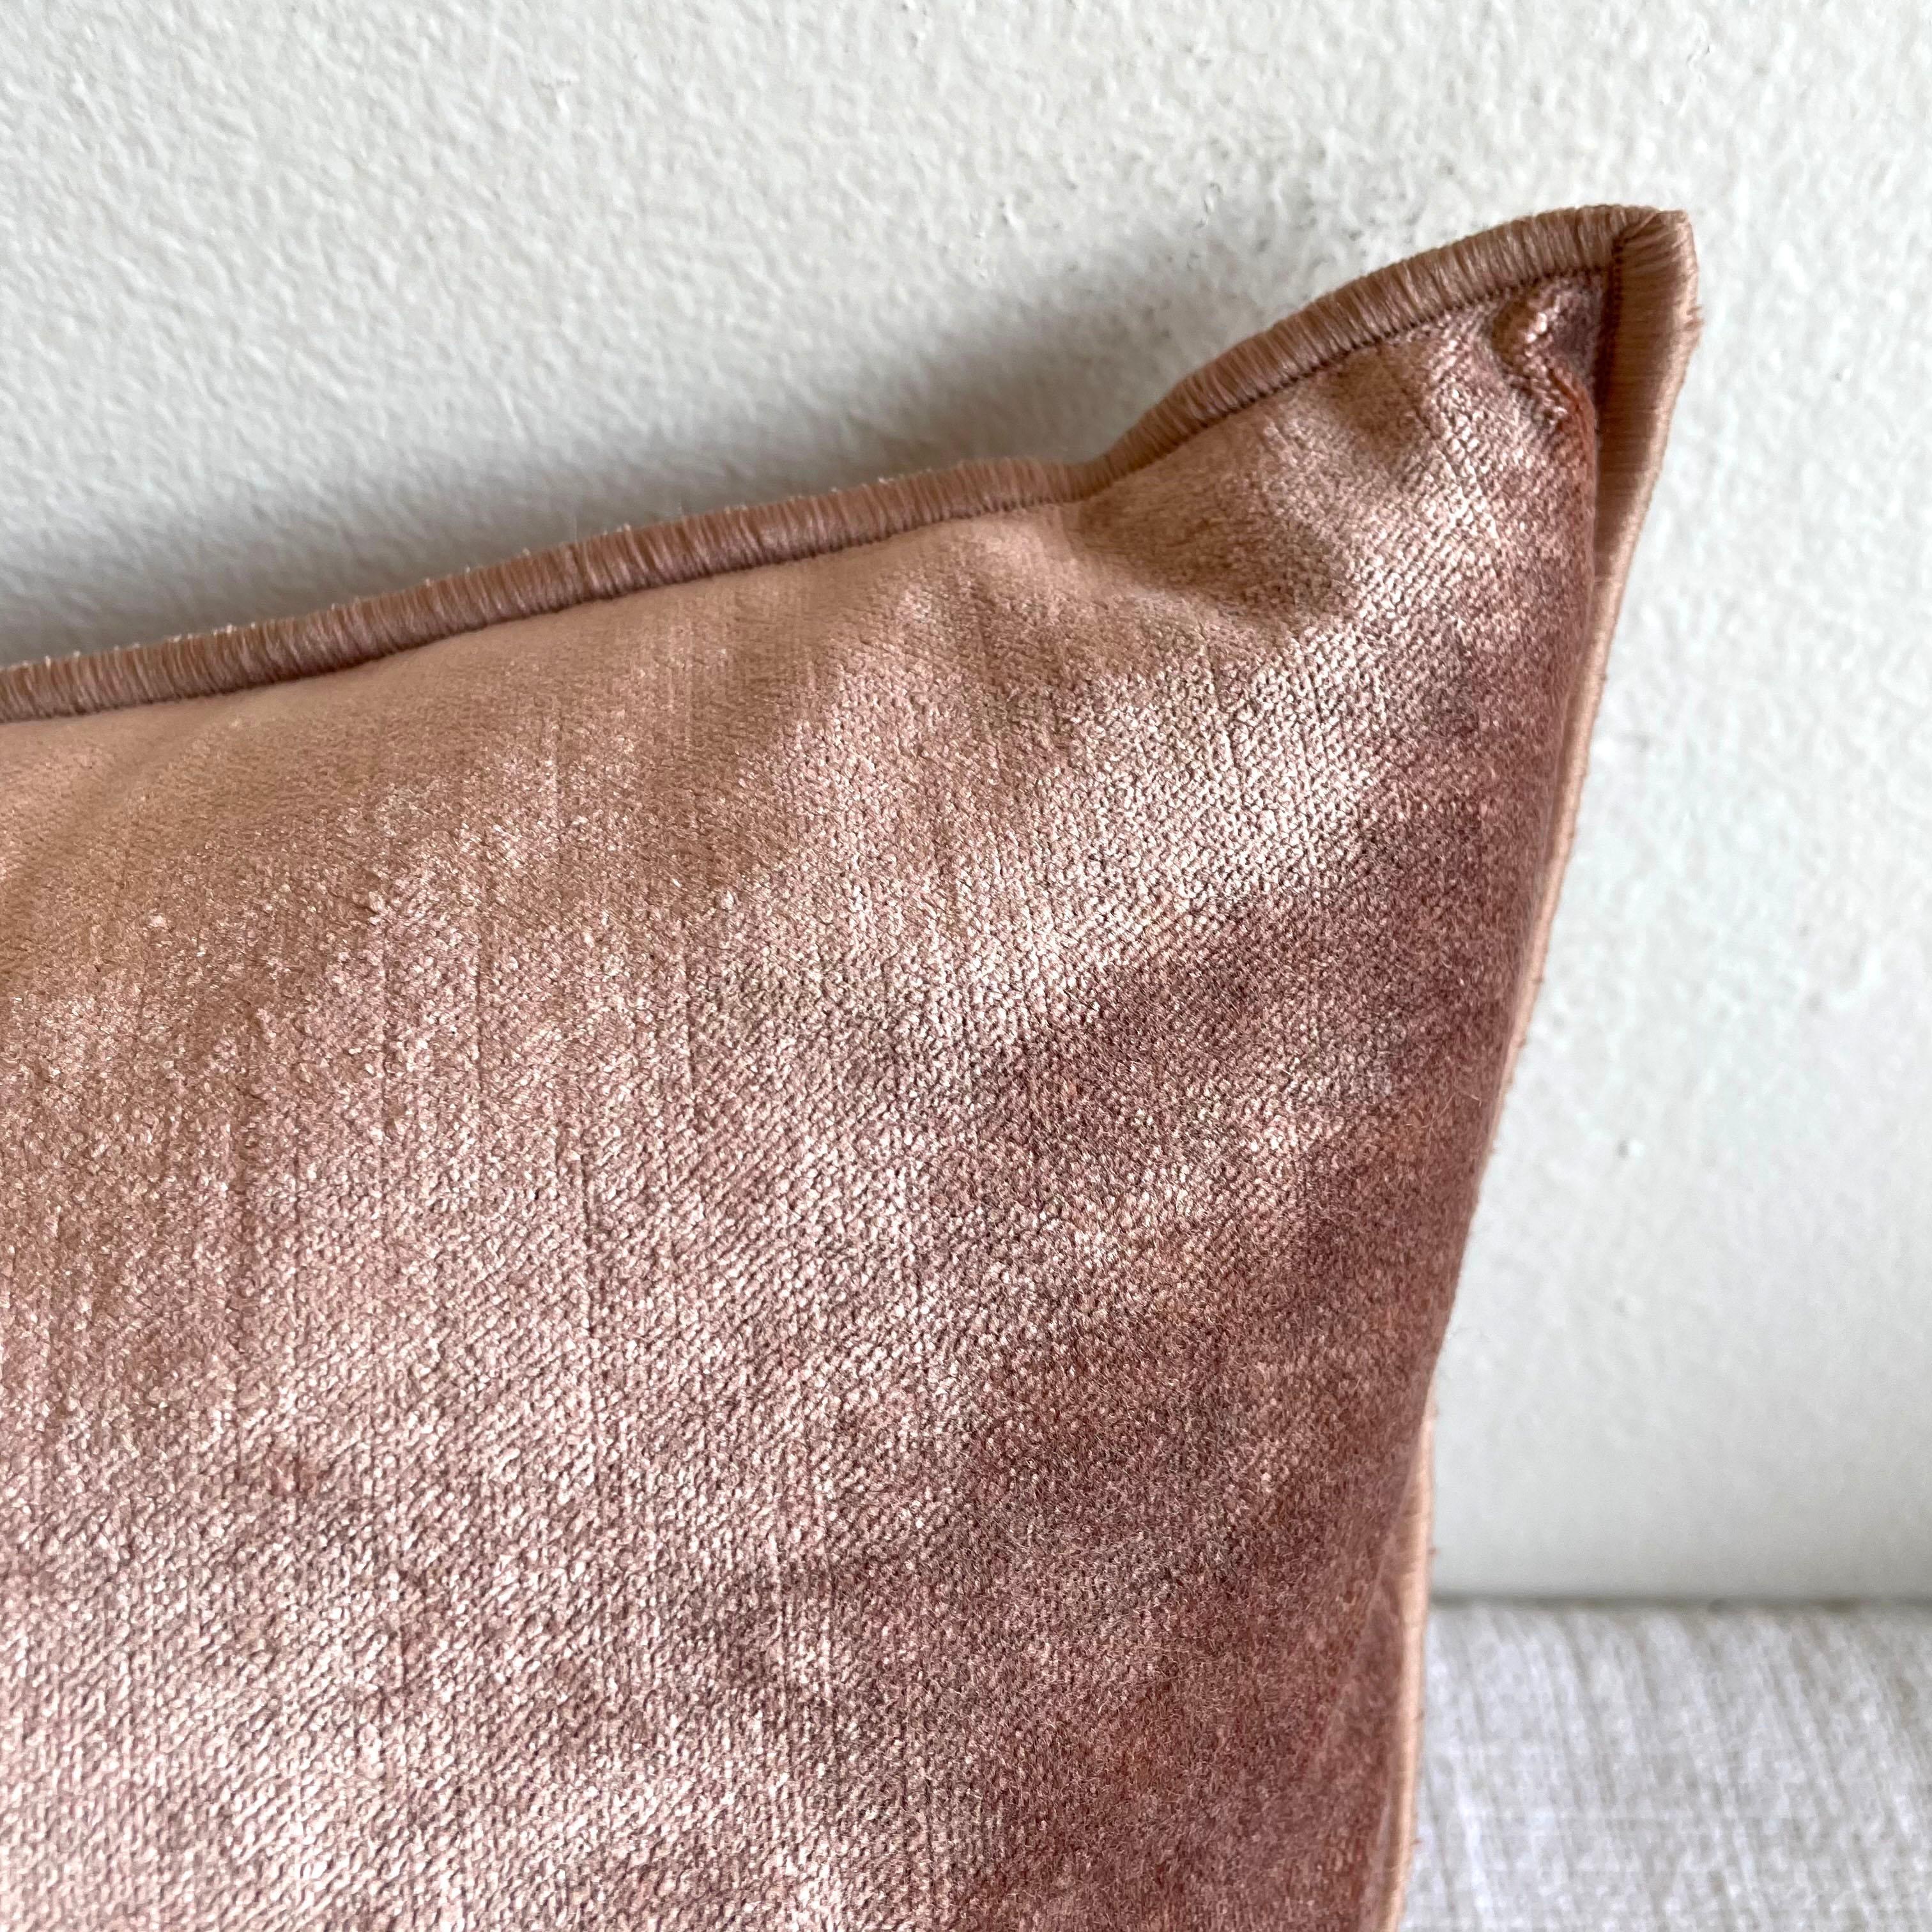 Beautiful French blush pink vintage style velvet lumbar with binded edge. Metal zipper closure, and leather pull.

Custom made in Paris, France.

Size: 12